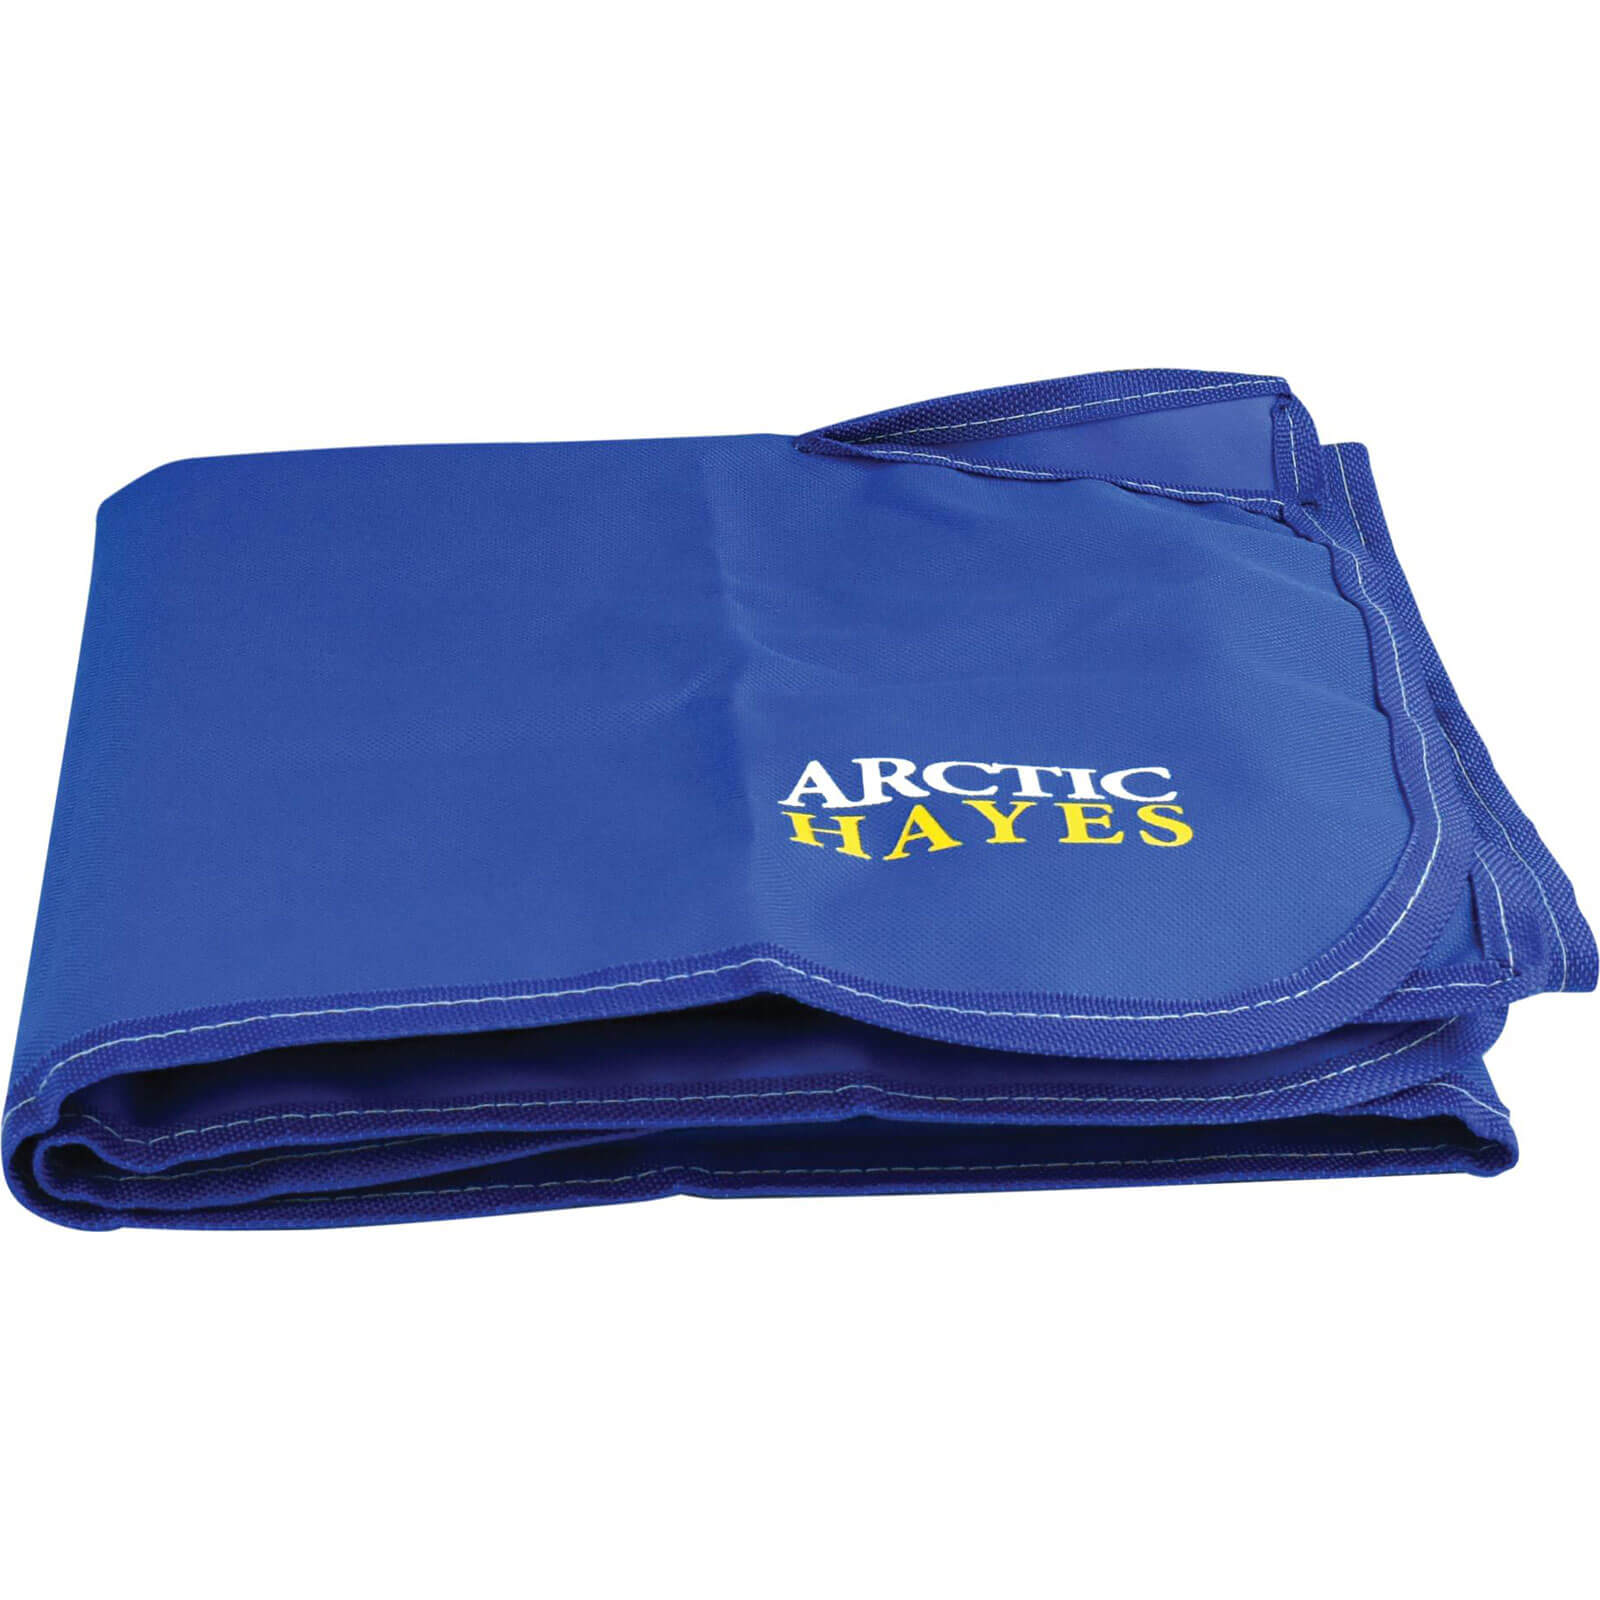 Image of Arctic Hayes Work Mat 1.2m 0.75m Pack of 1